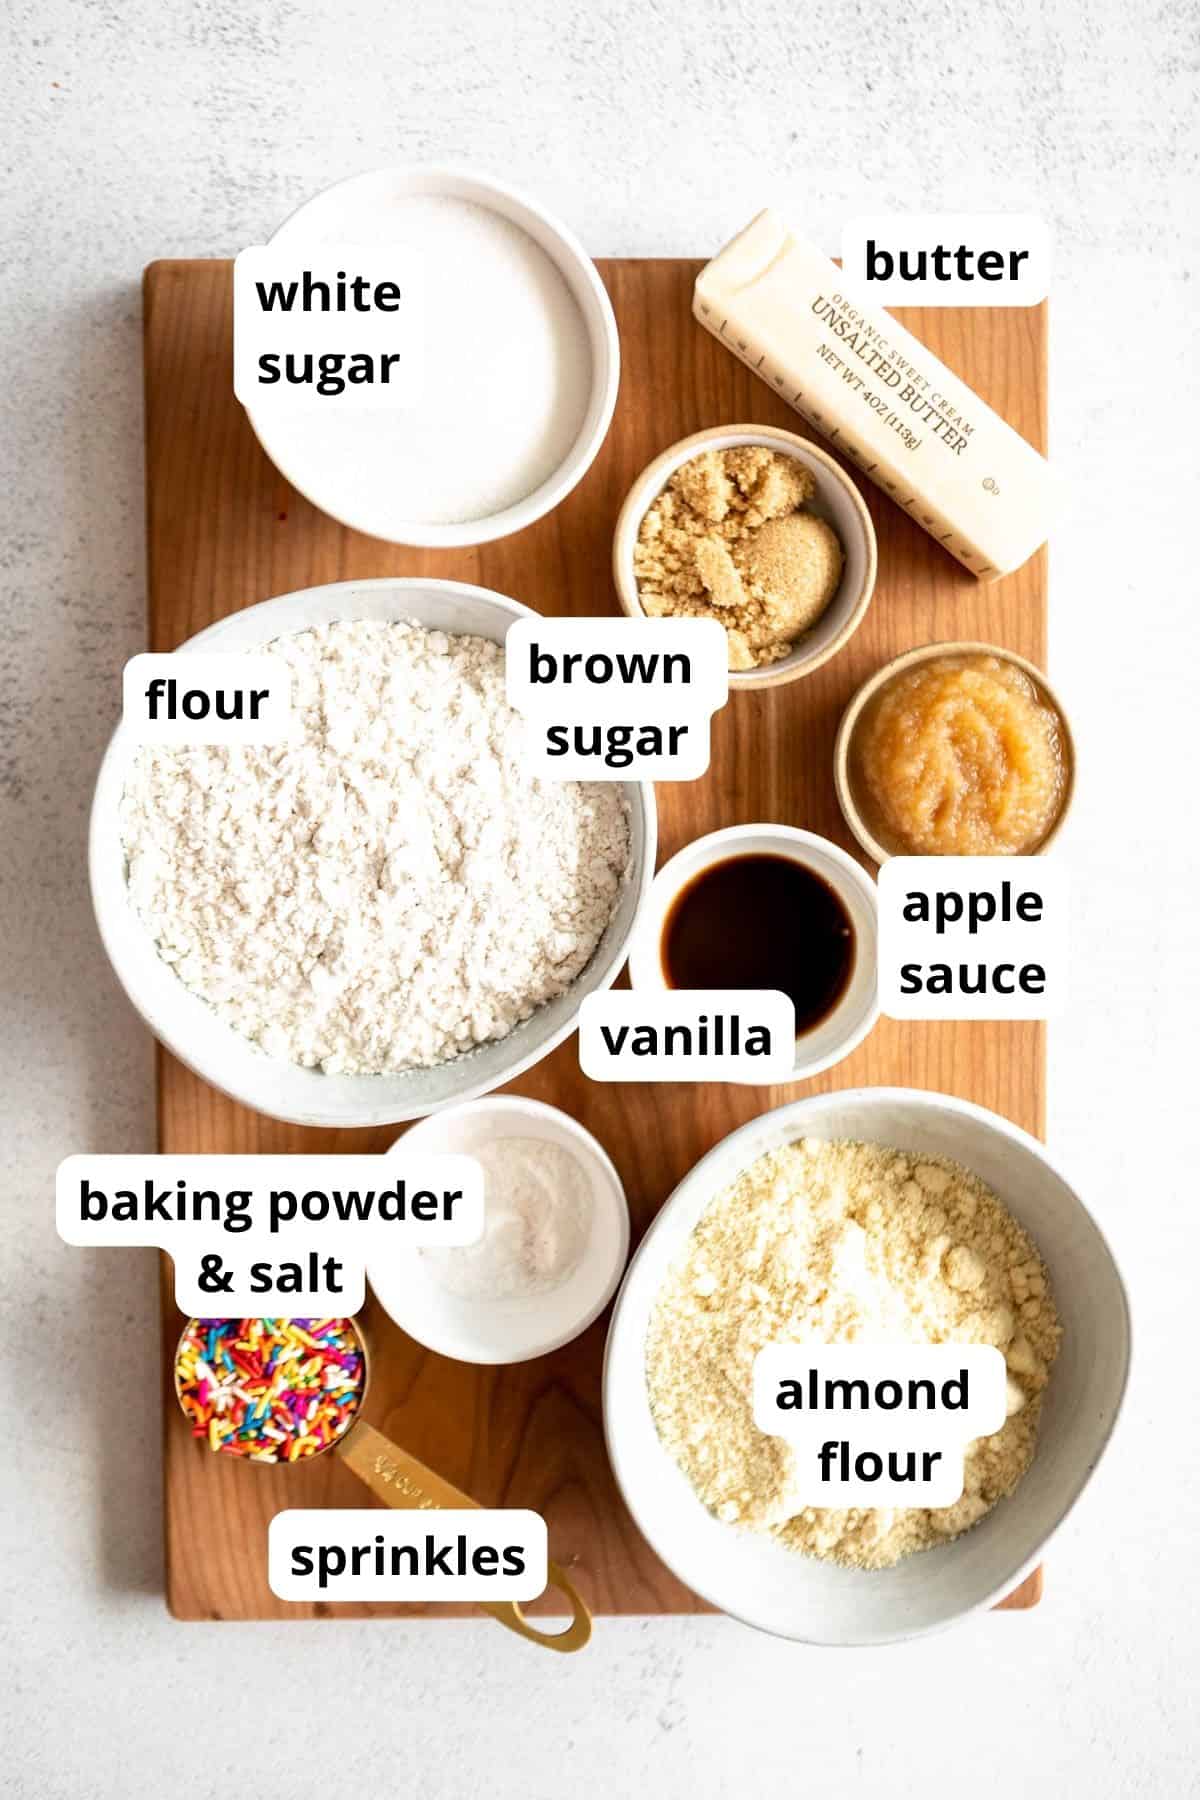 ingredients in bowls with labels